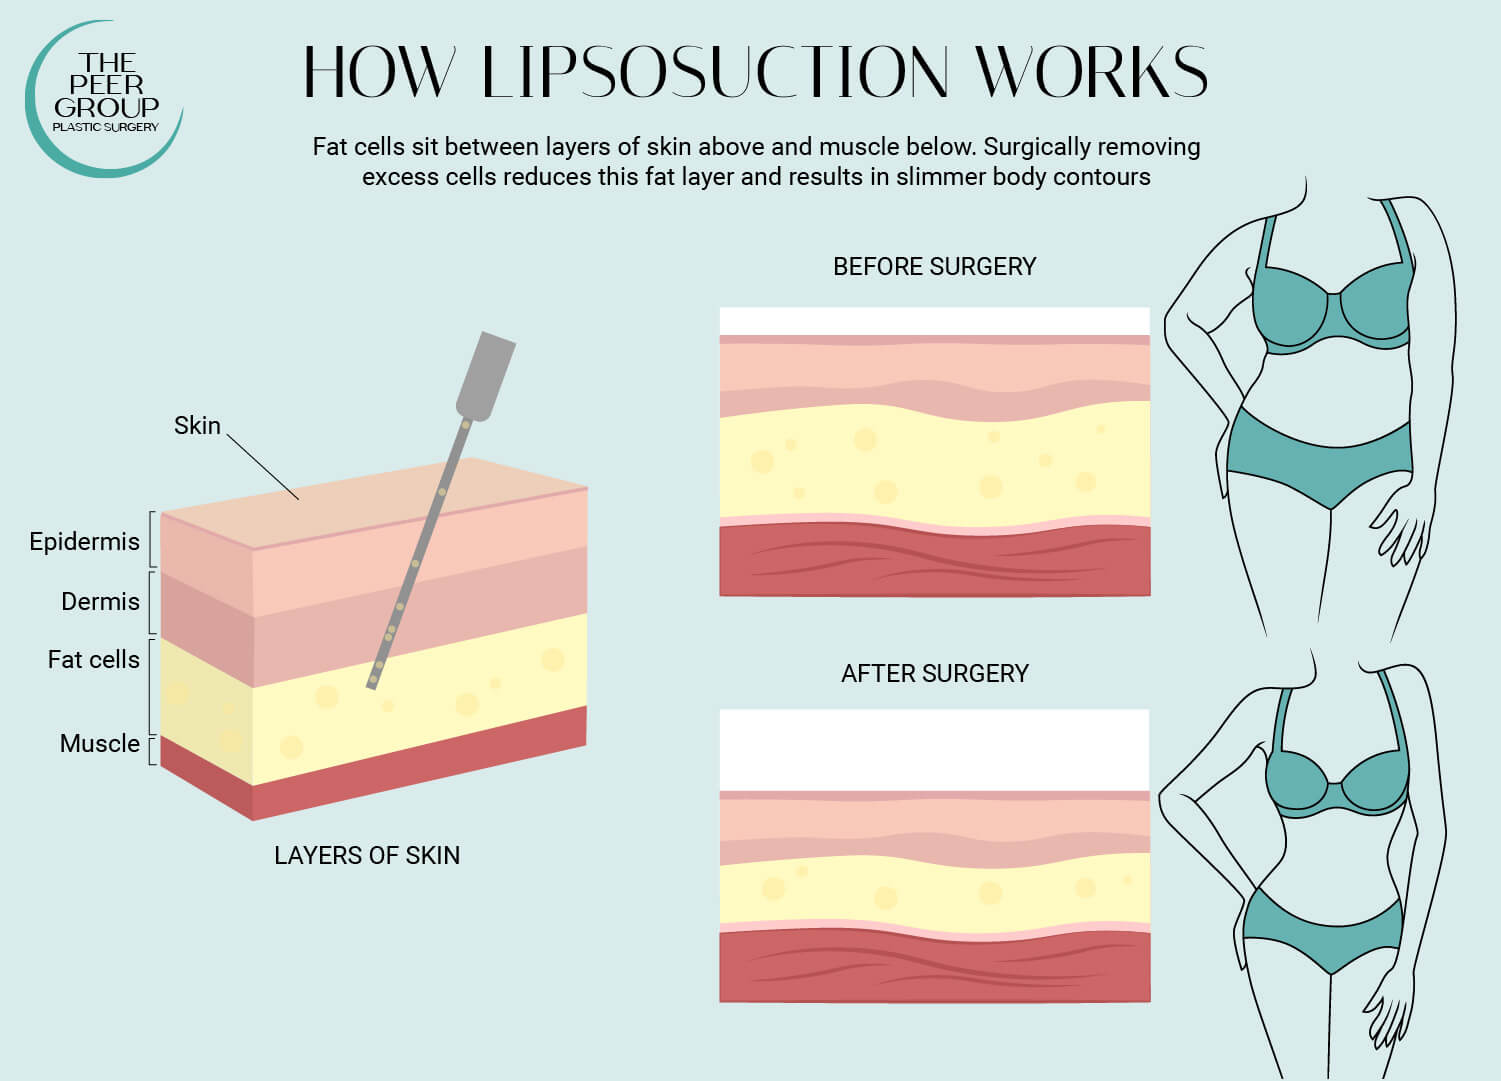 See how liposuction works at New Jersey’s The Peer Group.